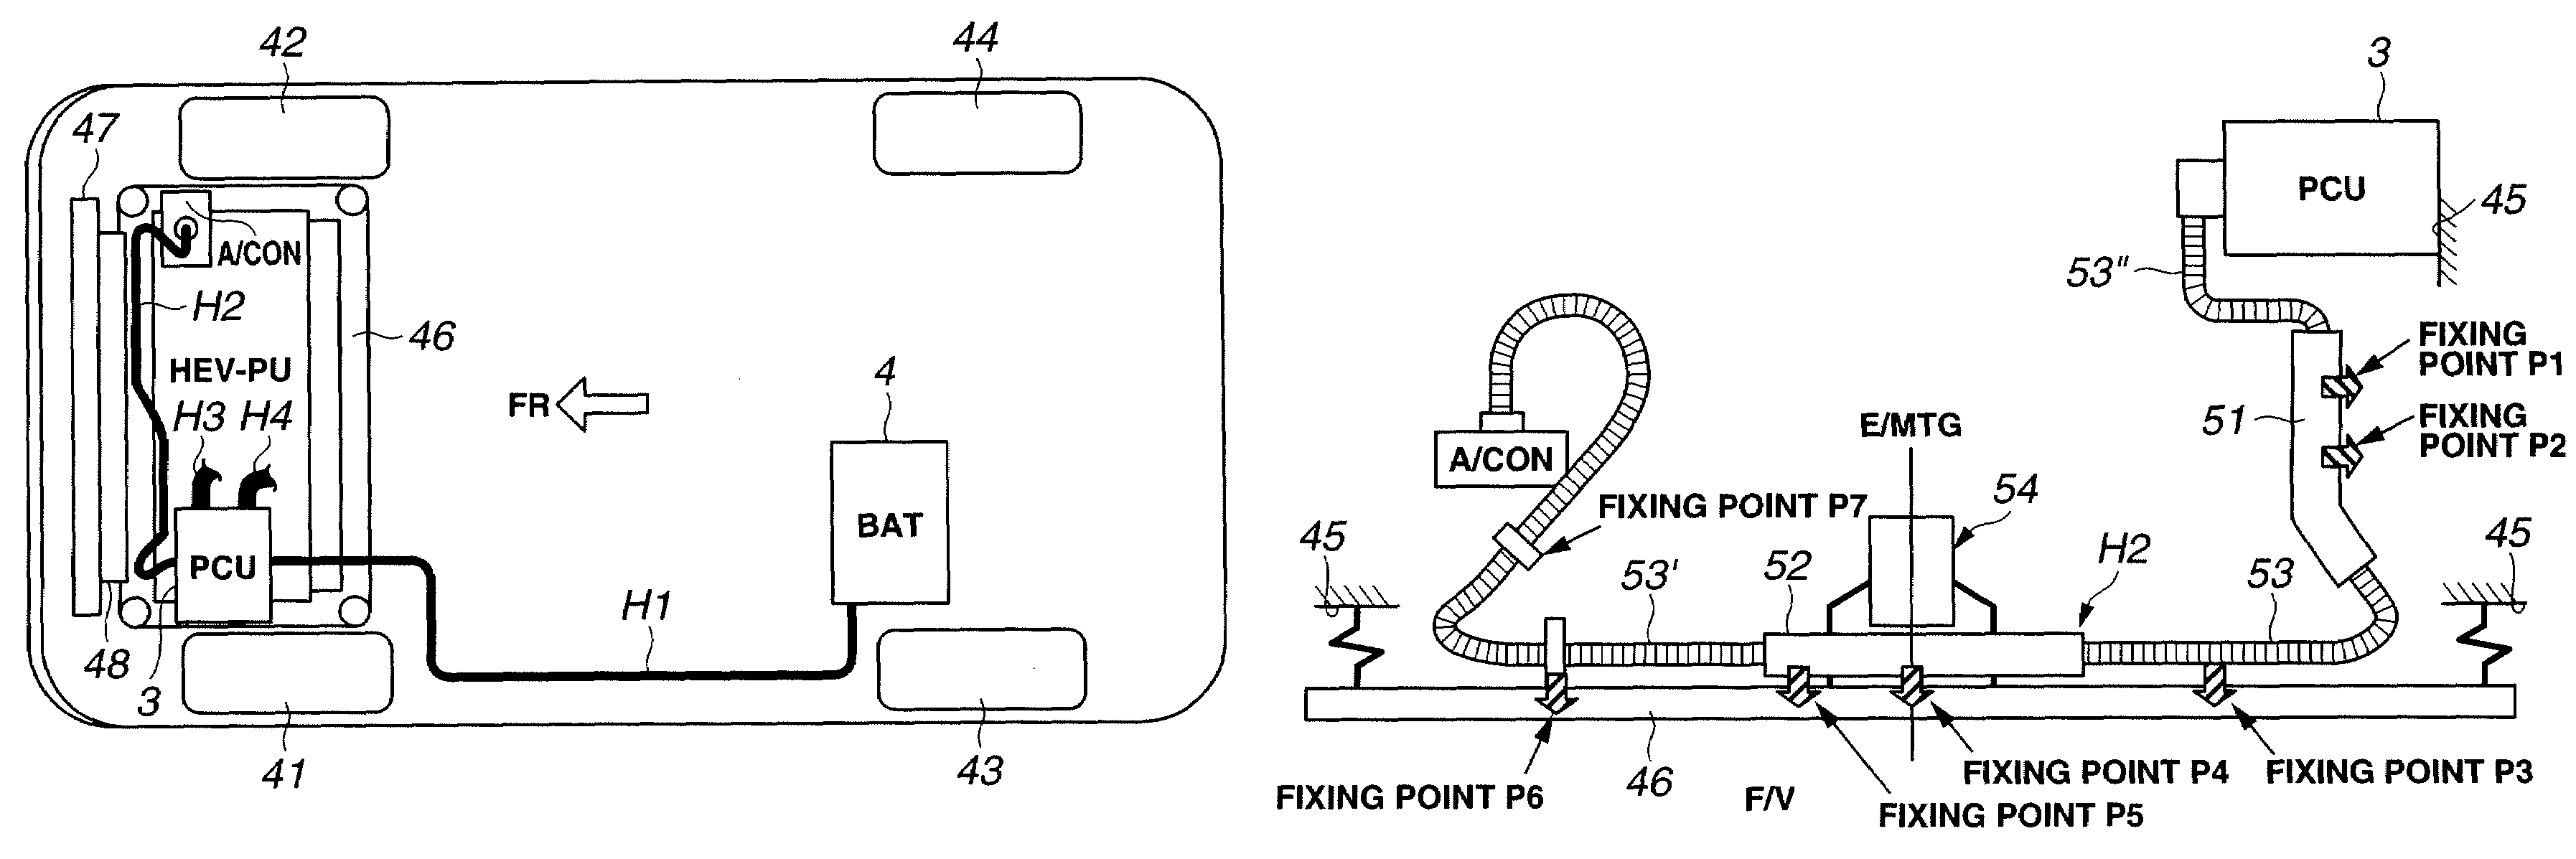 Harness routing structure for vehicle